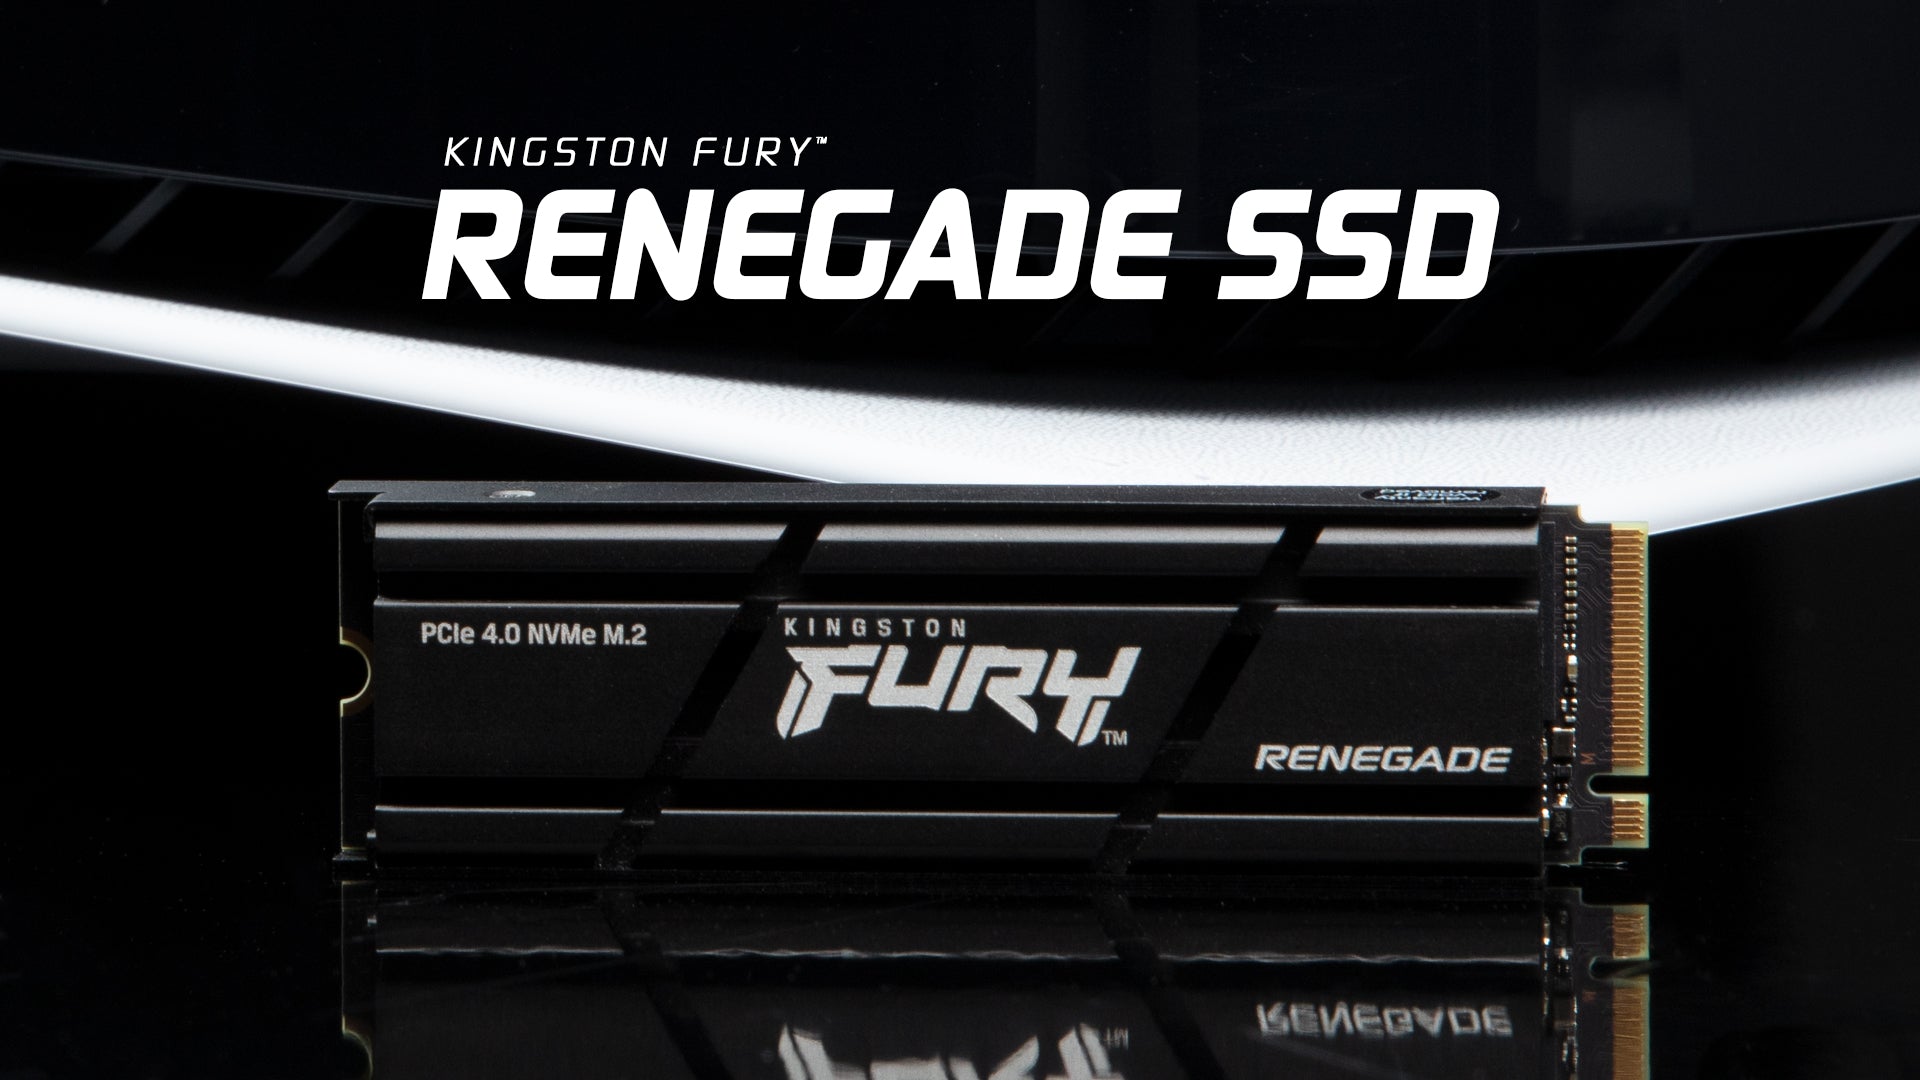 Technology Kingston Kingston FURY up SSD – - Performance Renegade Gaming Elevate to 7300MB/s NVMe